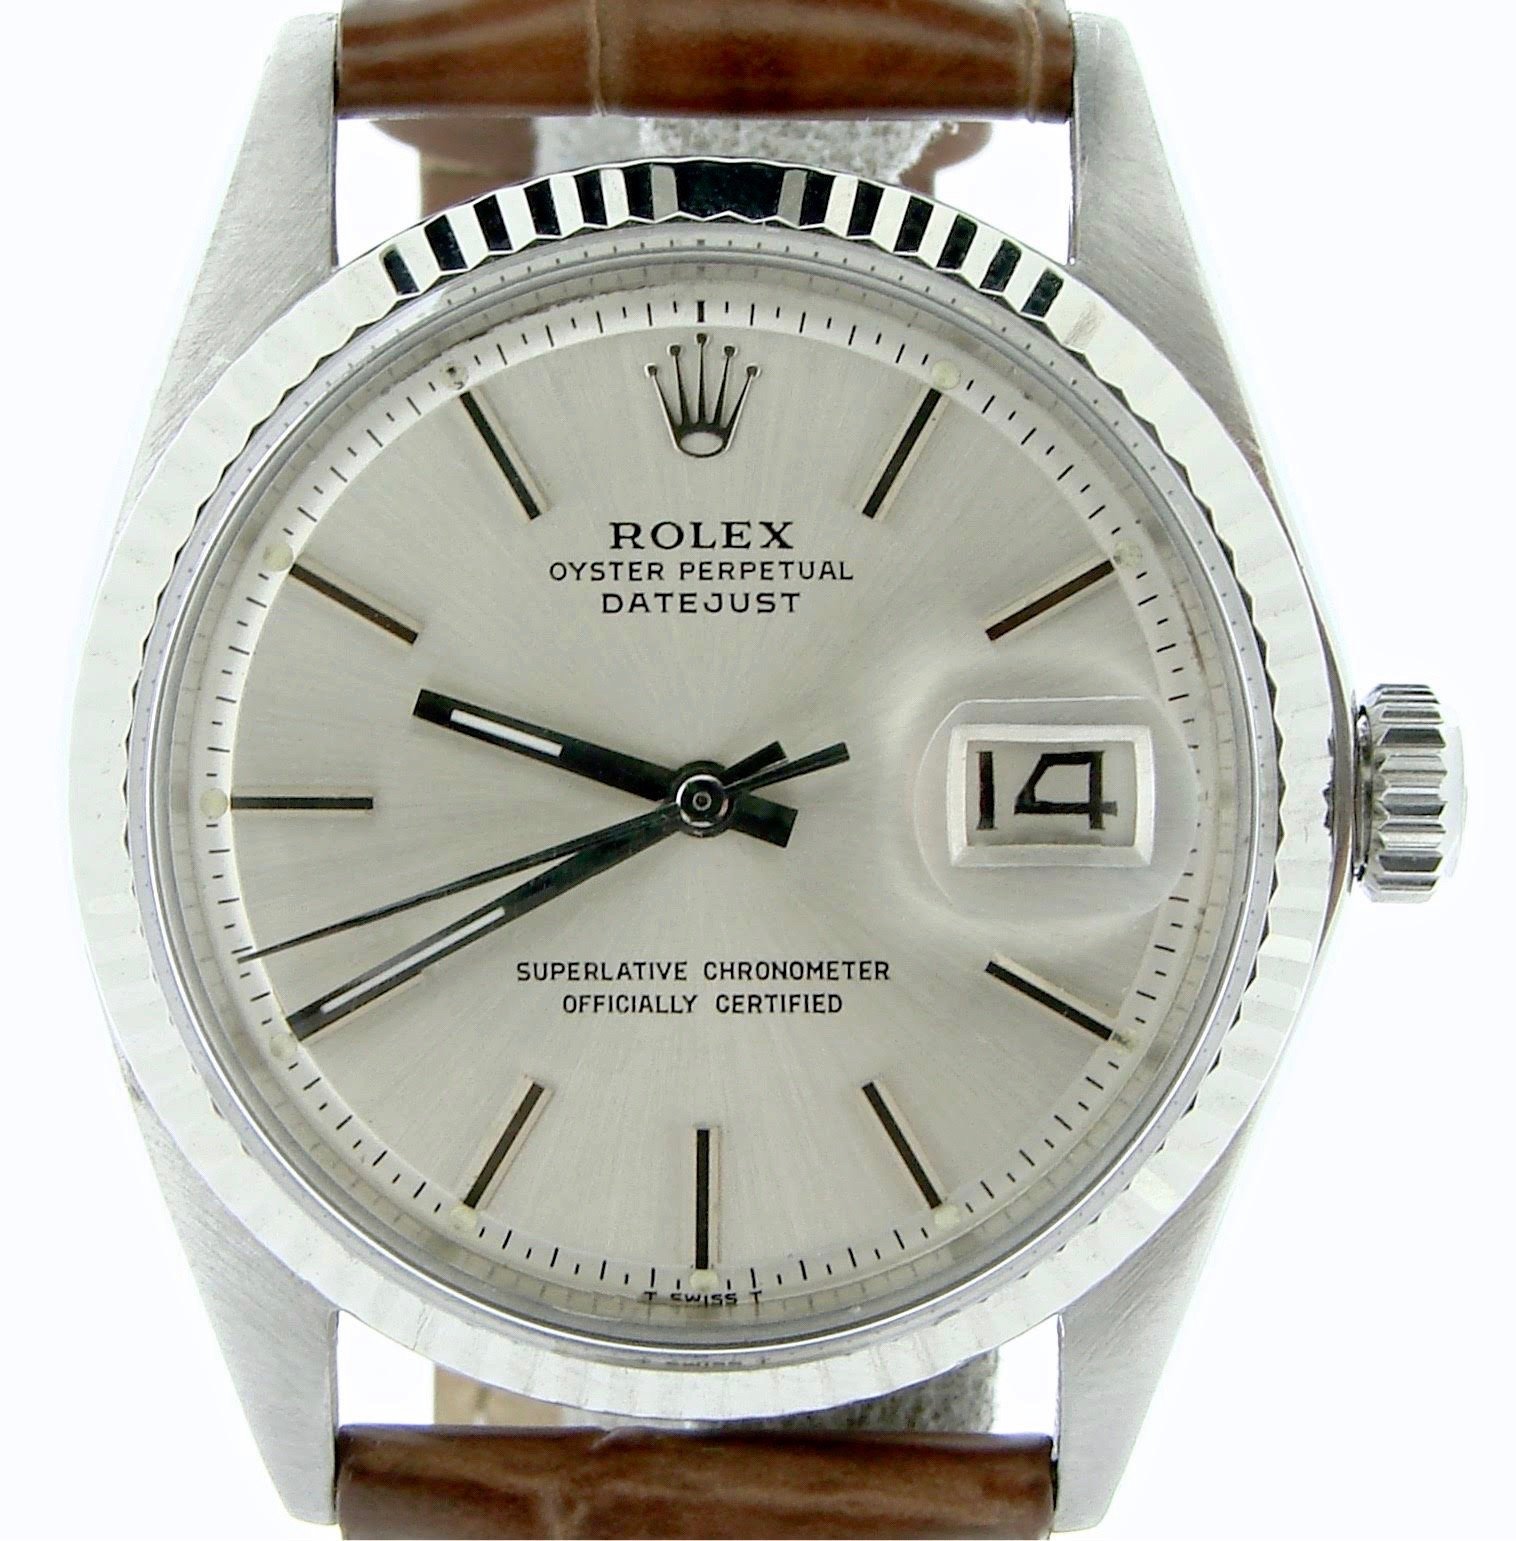 Preowned Customized Rolex Mens Datejust 1601 Stainless Steel Watch (Certified Authentic/Warranty)